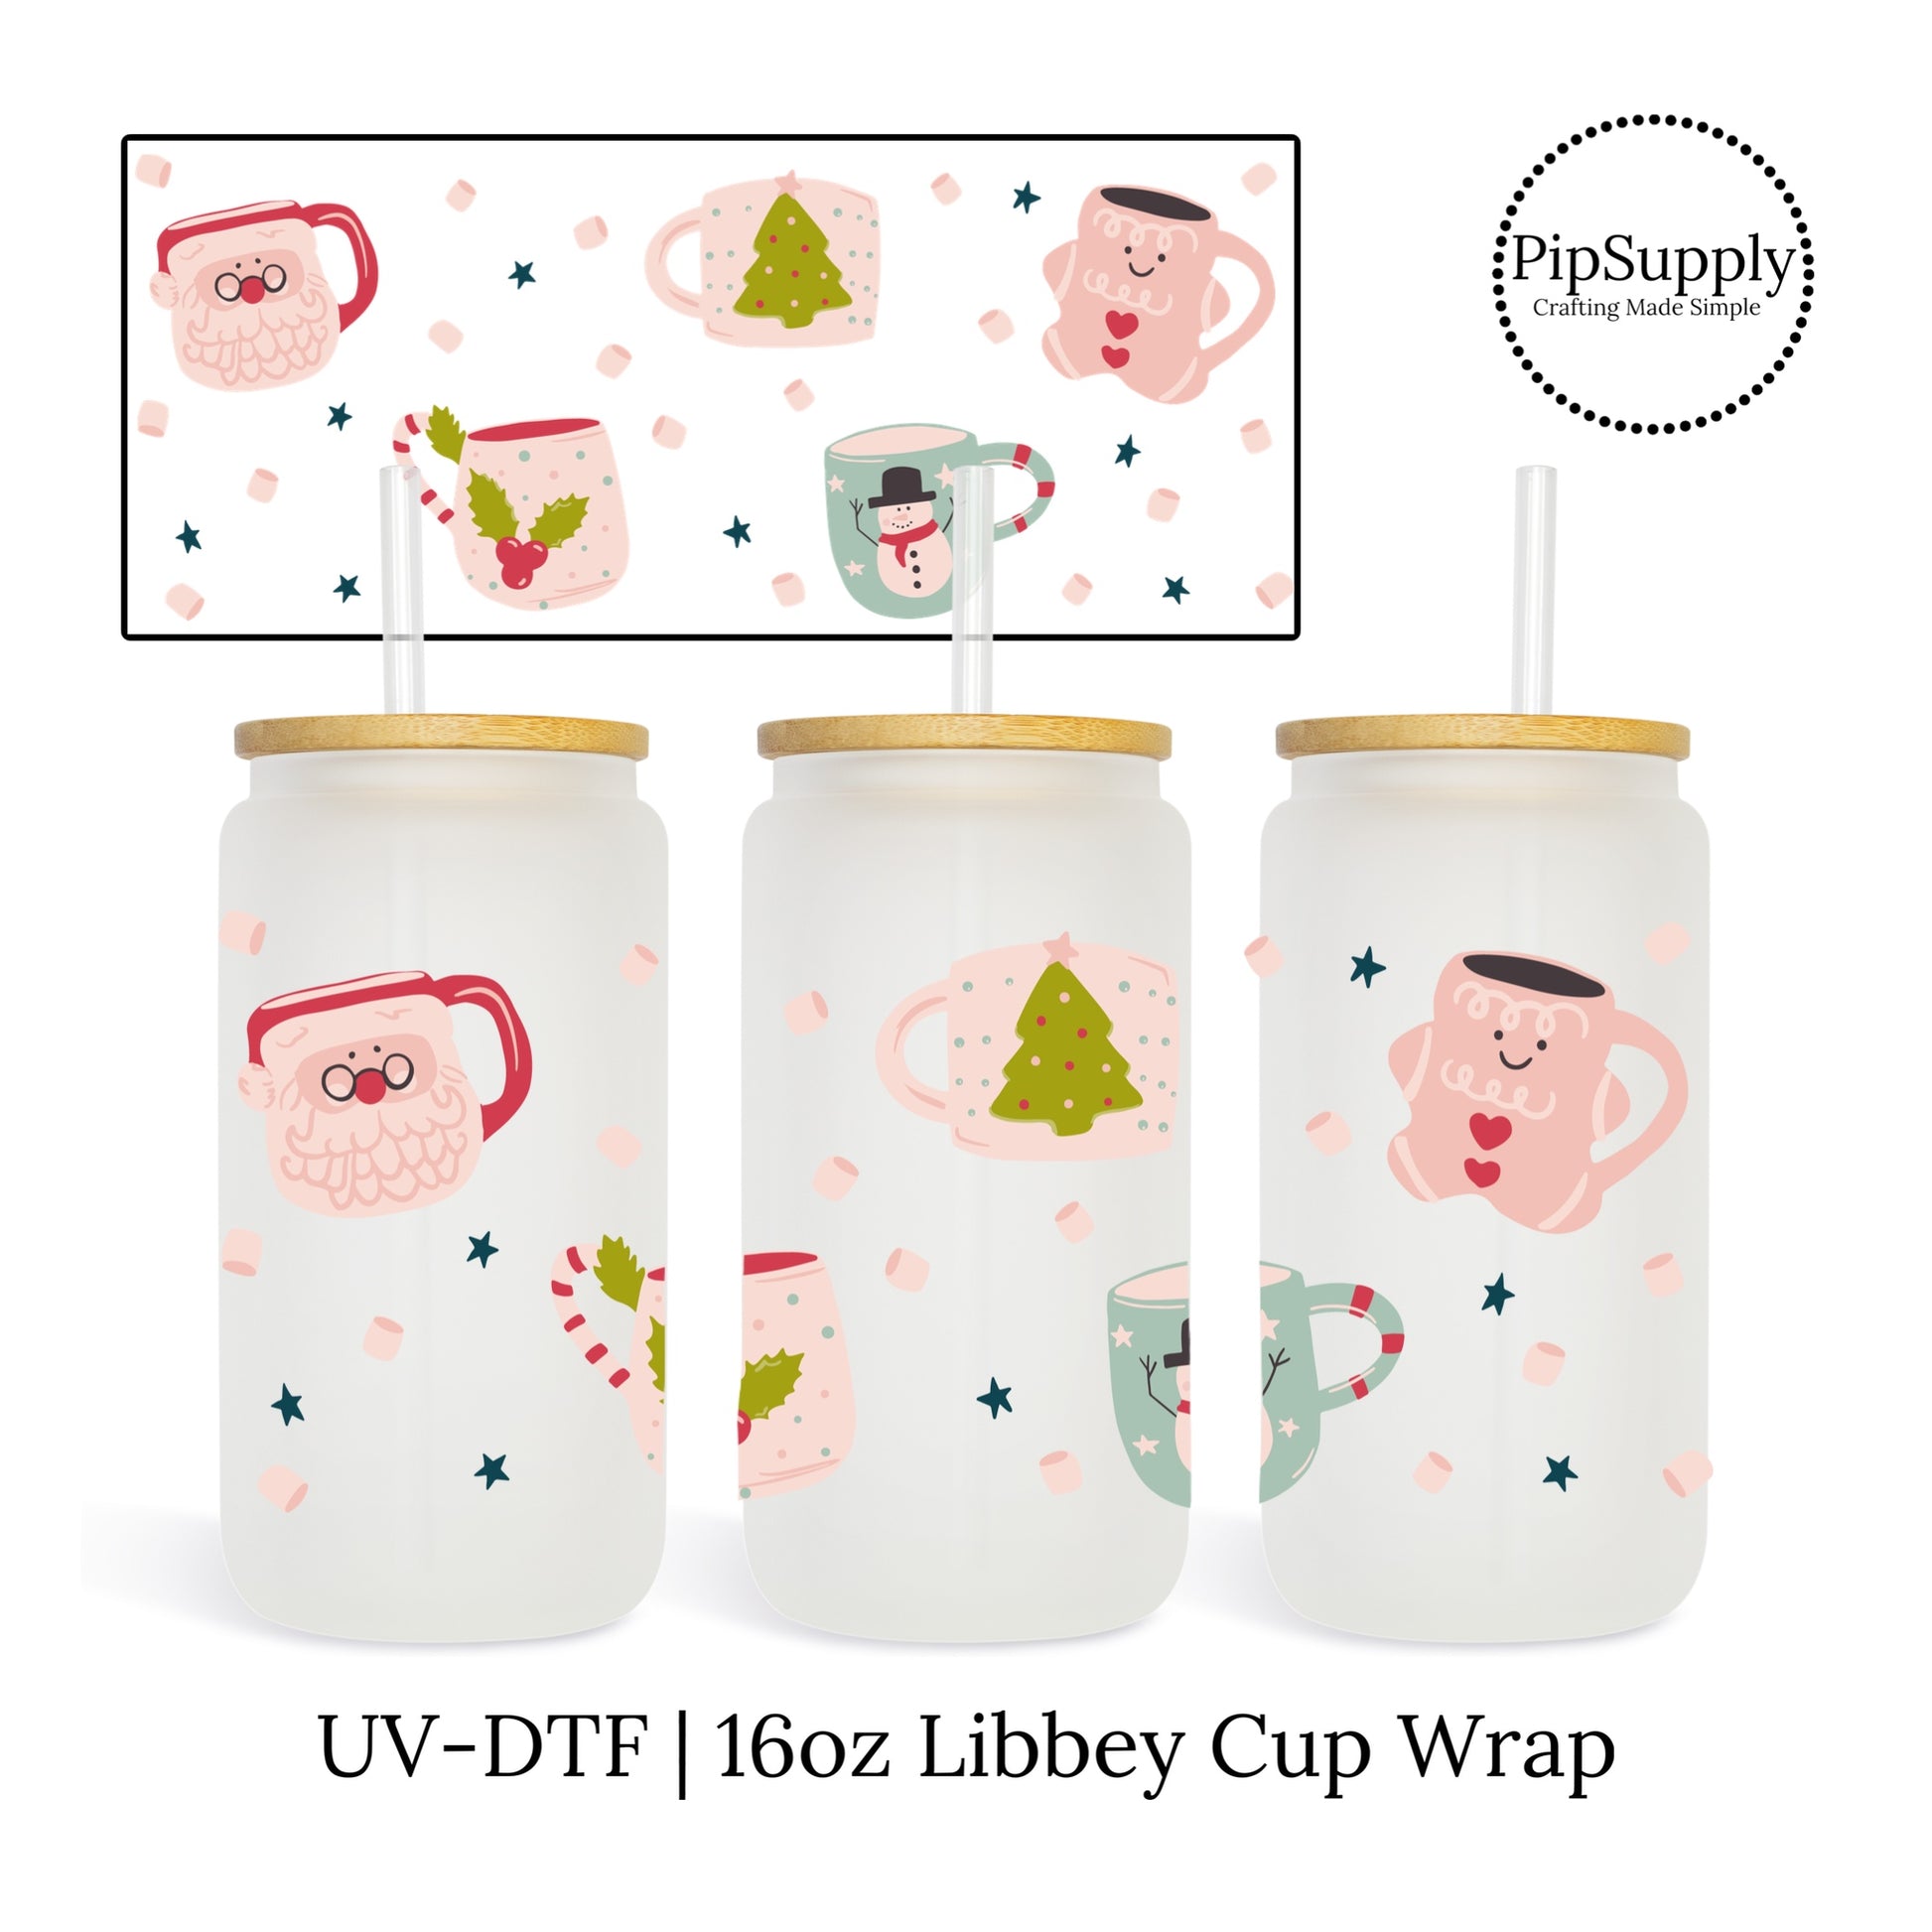 UV DTF Waterproof Cup Wrap Transfer Variety Pack That Includes Wraps. for  16 oz Libbey Glass Tumblers and Other Hard Surfaces (Variety Pack 1)